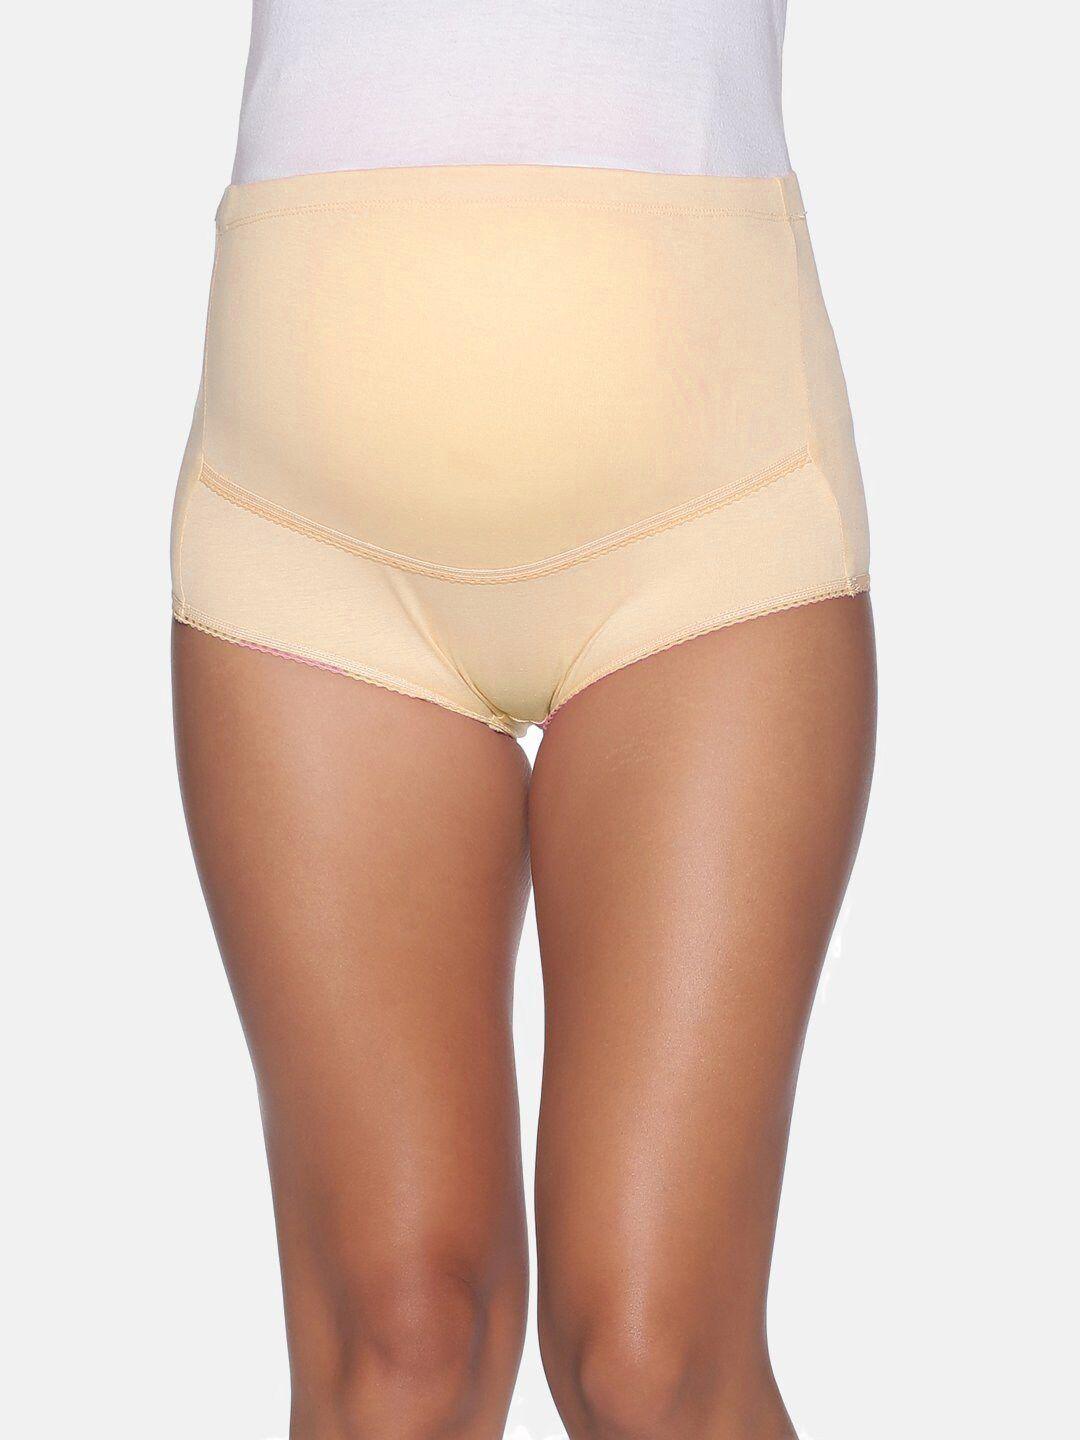 the mom store belly maternity briefs